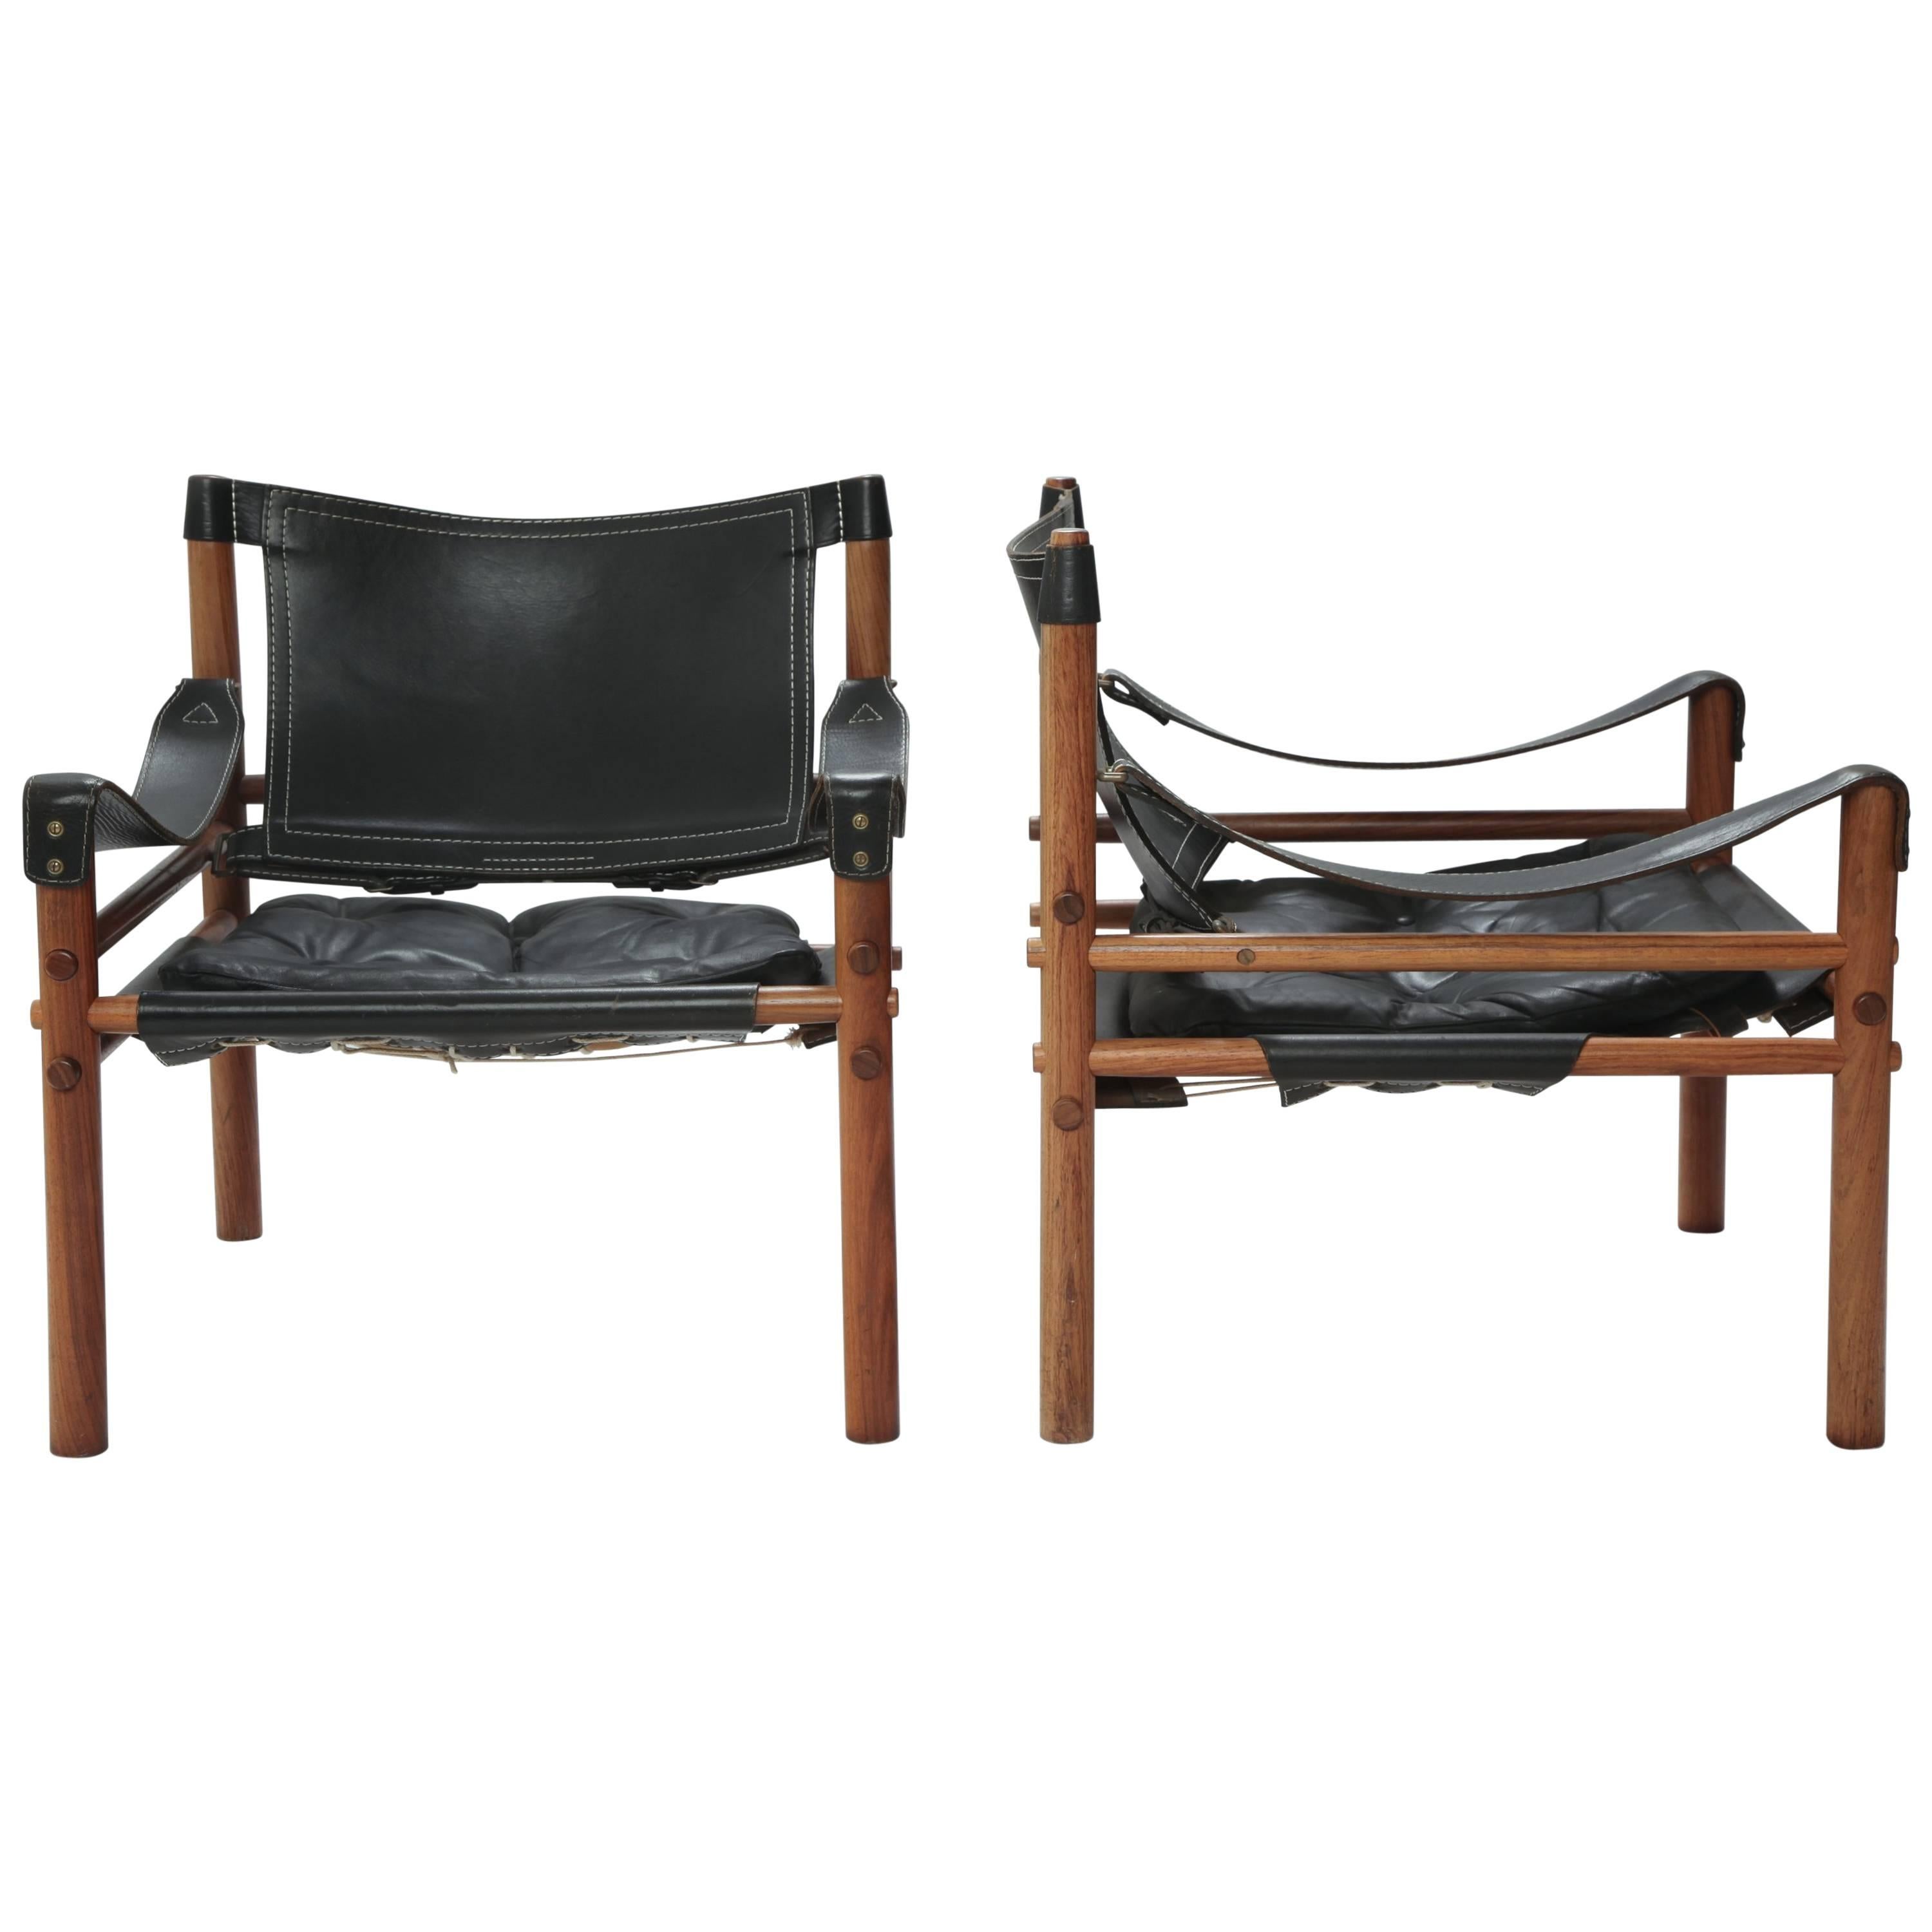 Pair of Rosewood Arne Norell "Sirocco" Safari Chairs, Sweden, 1960s